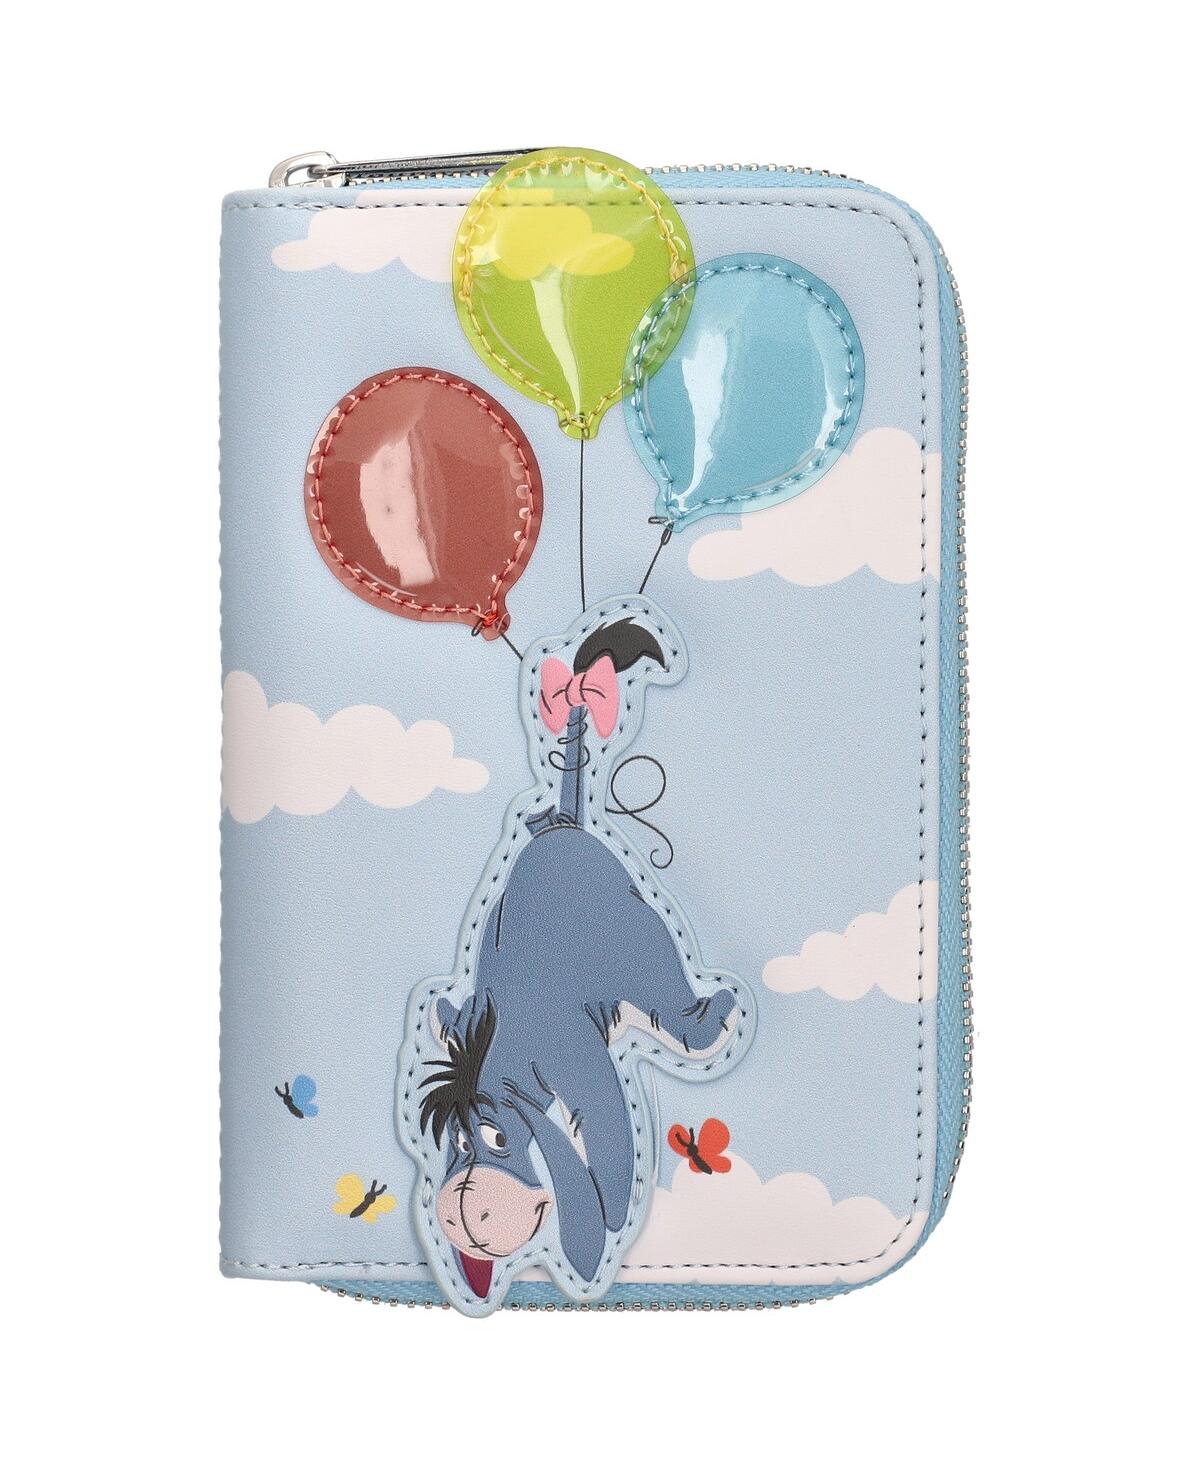 Loungefly Winnie The Pooh Balloons Zip Around Wallet In Blue